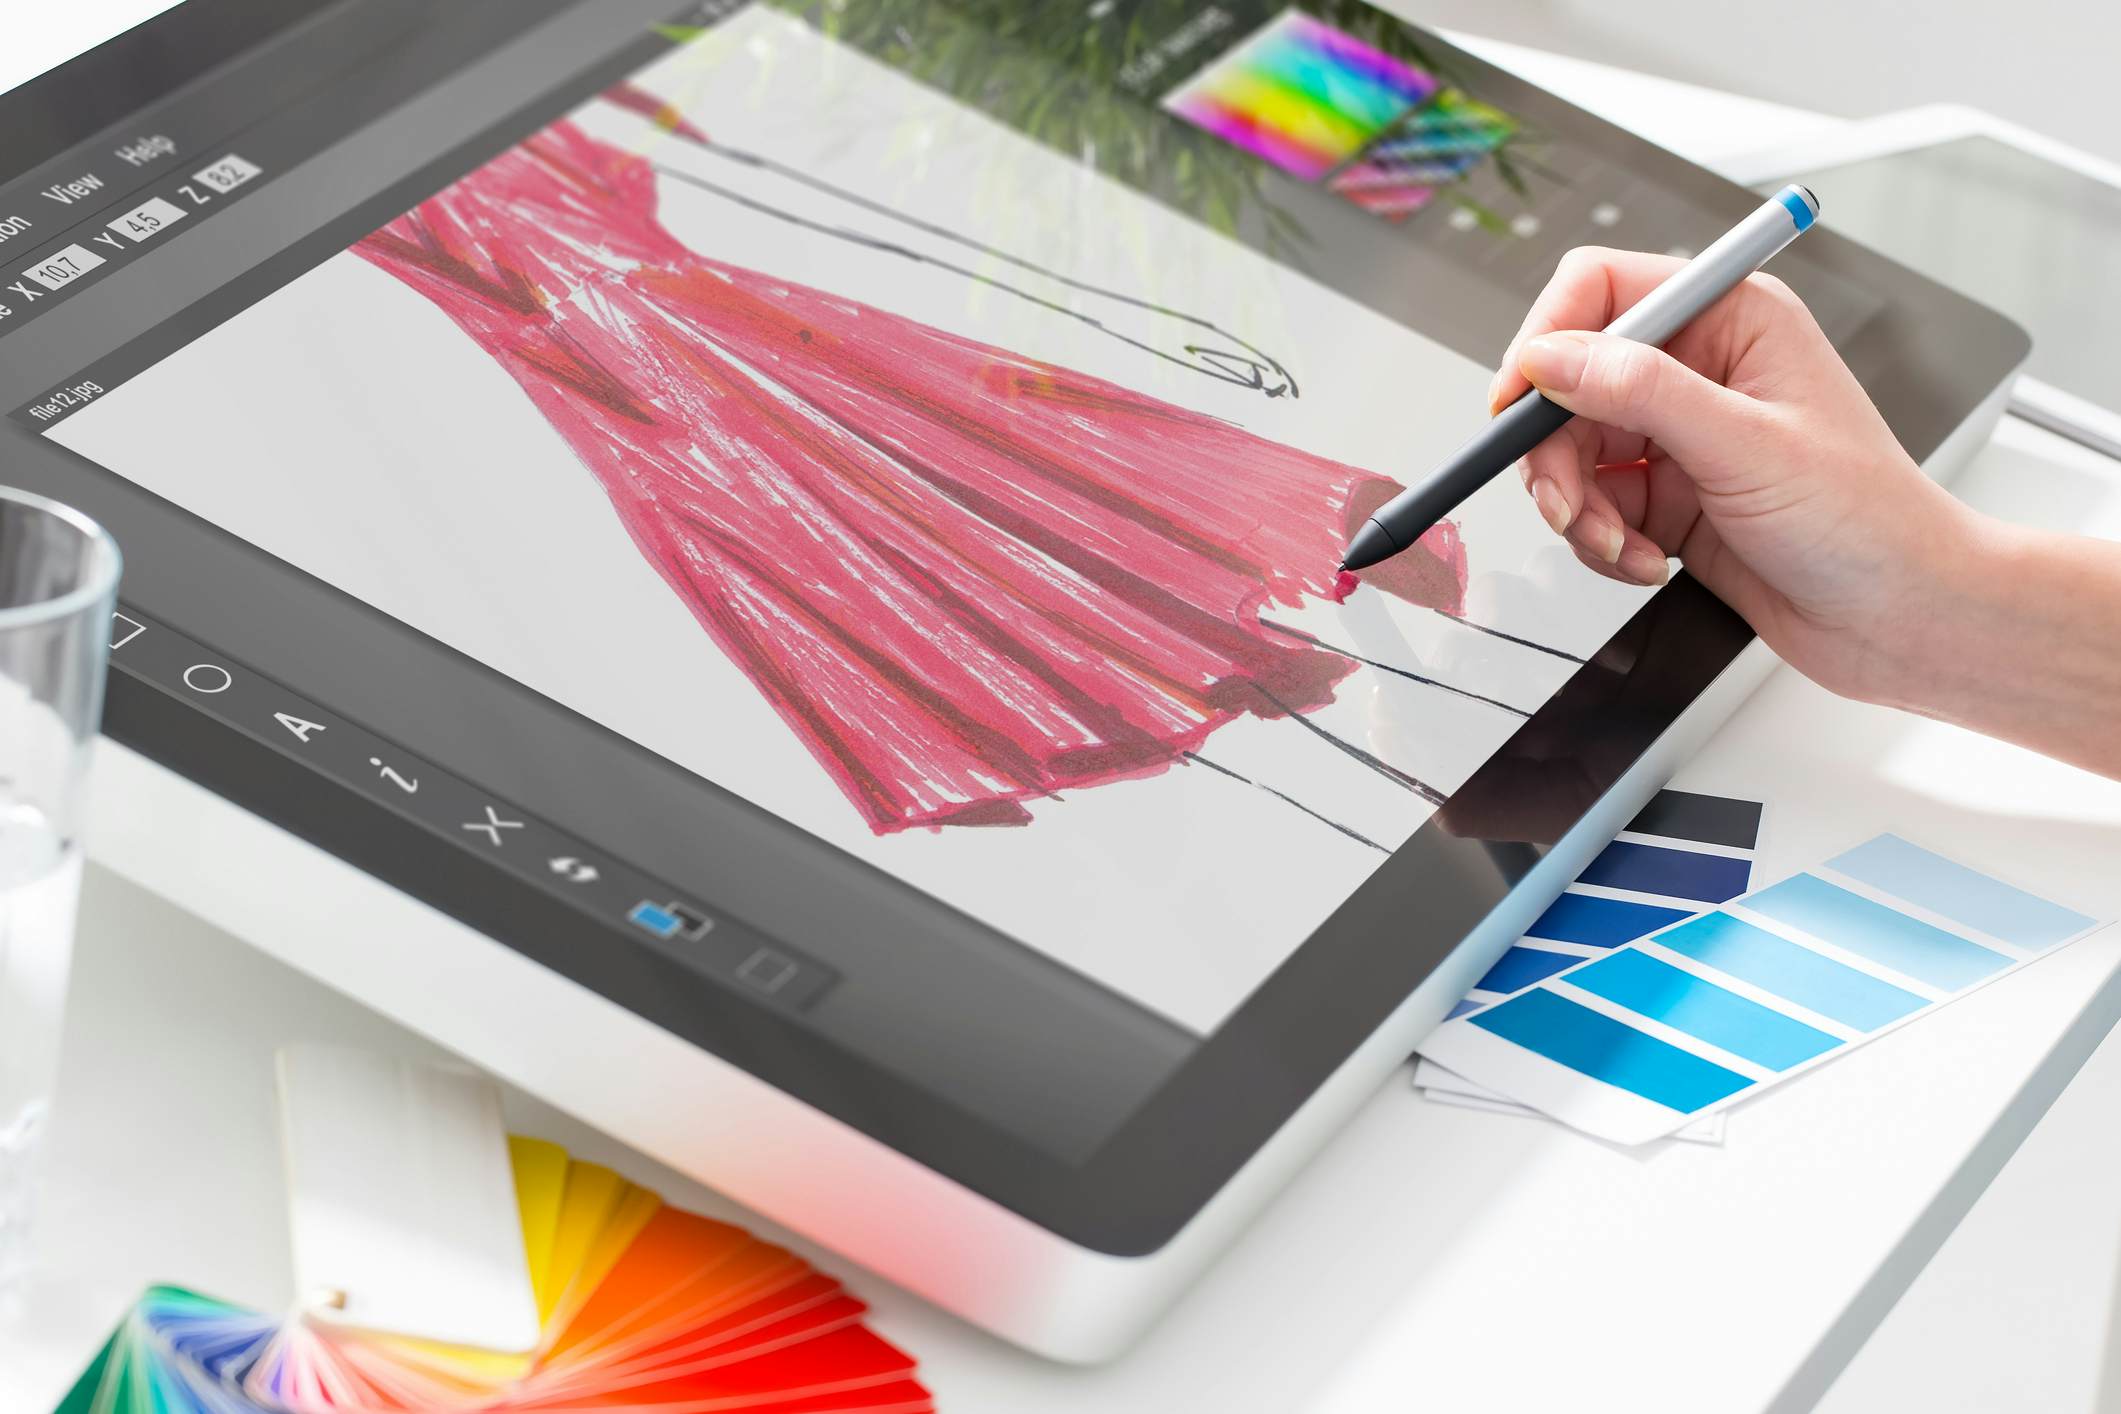 Student sketching a dress on a tablet